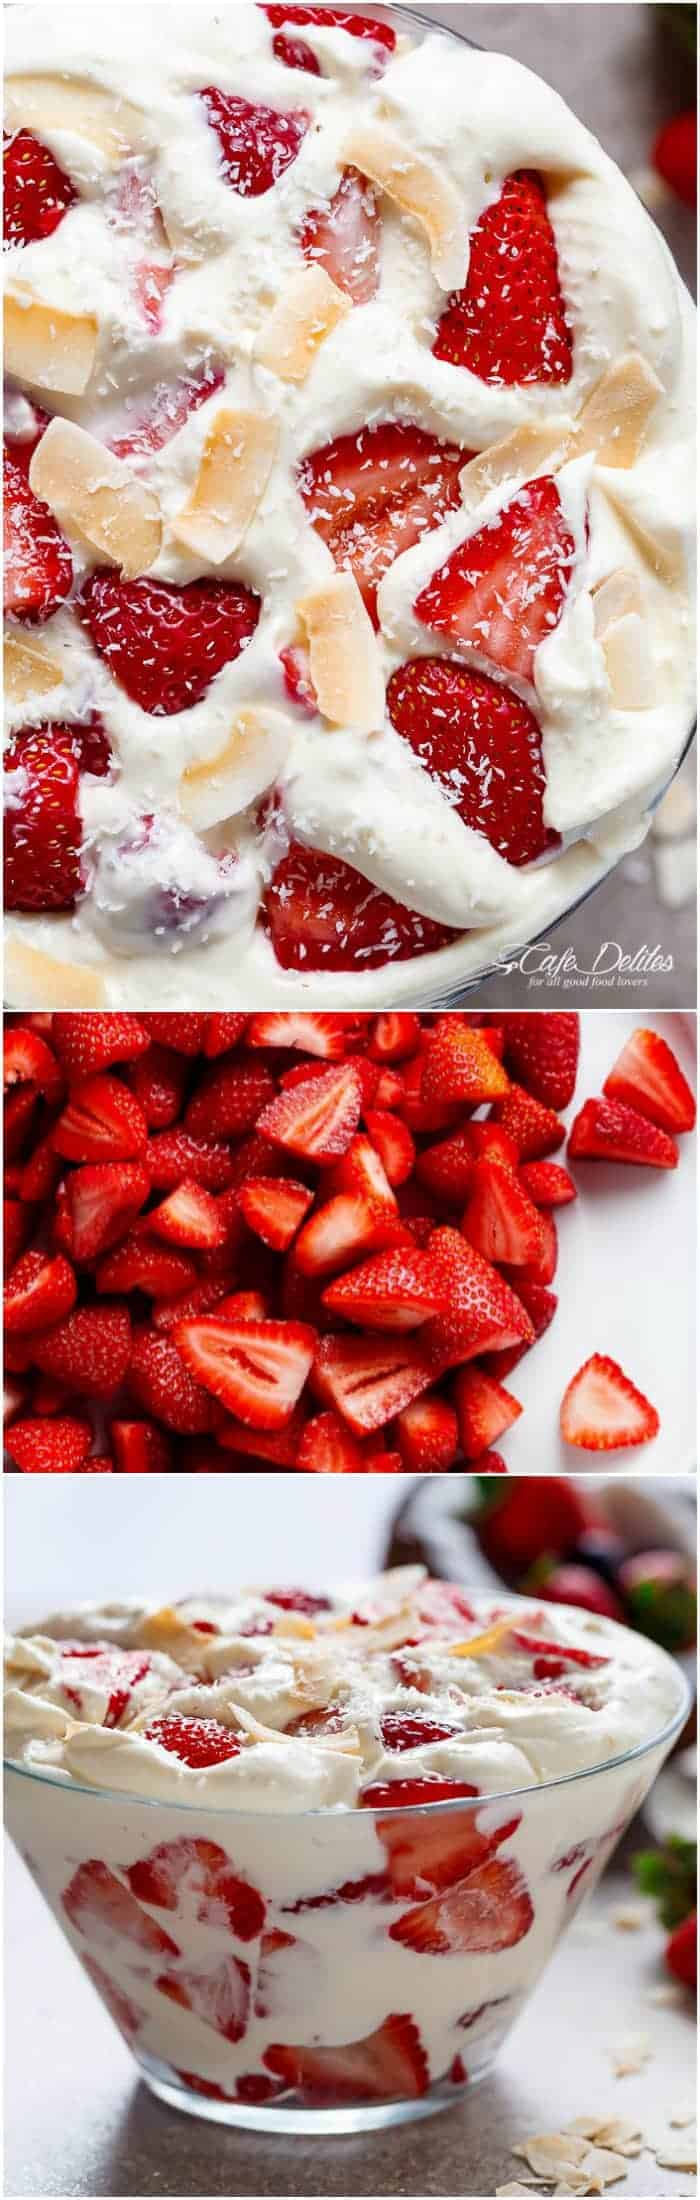 Strawberry-Coconut-Cheesecake-Salad Collage